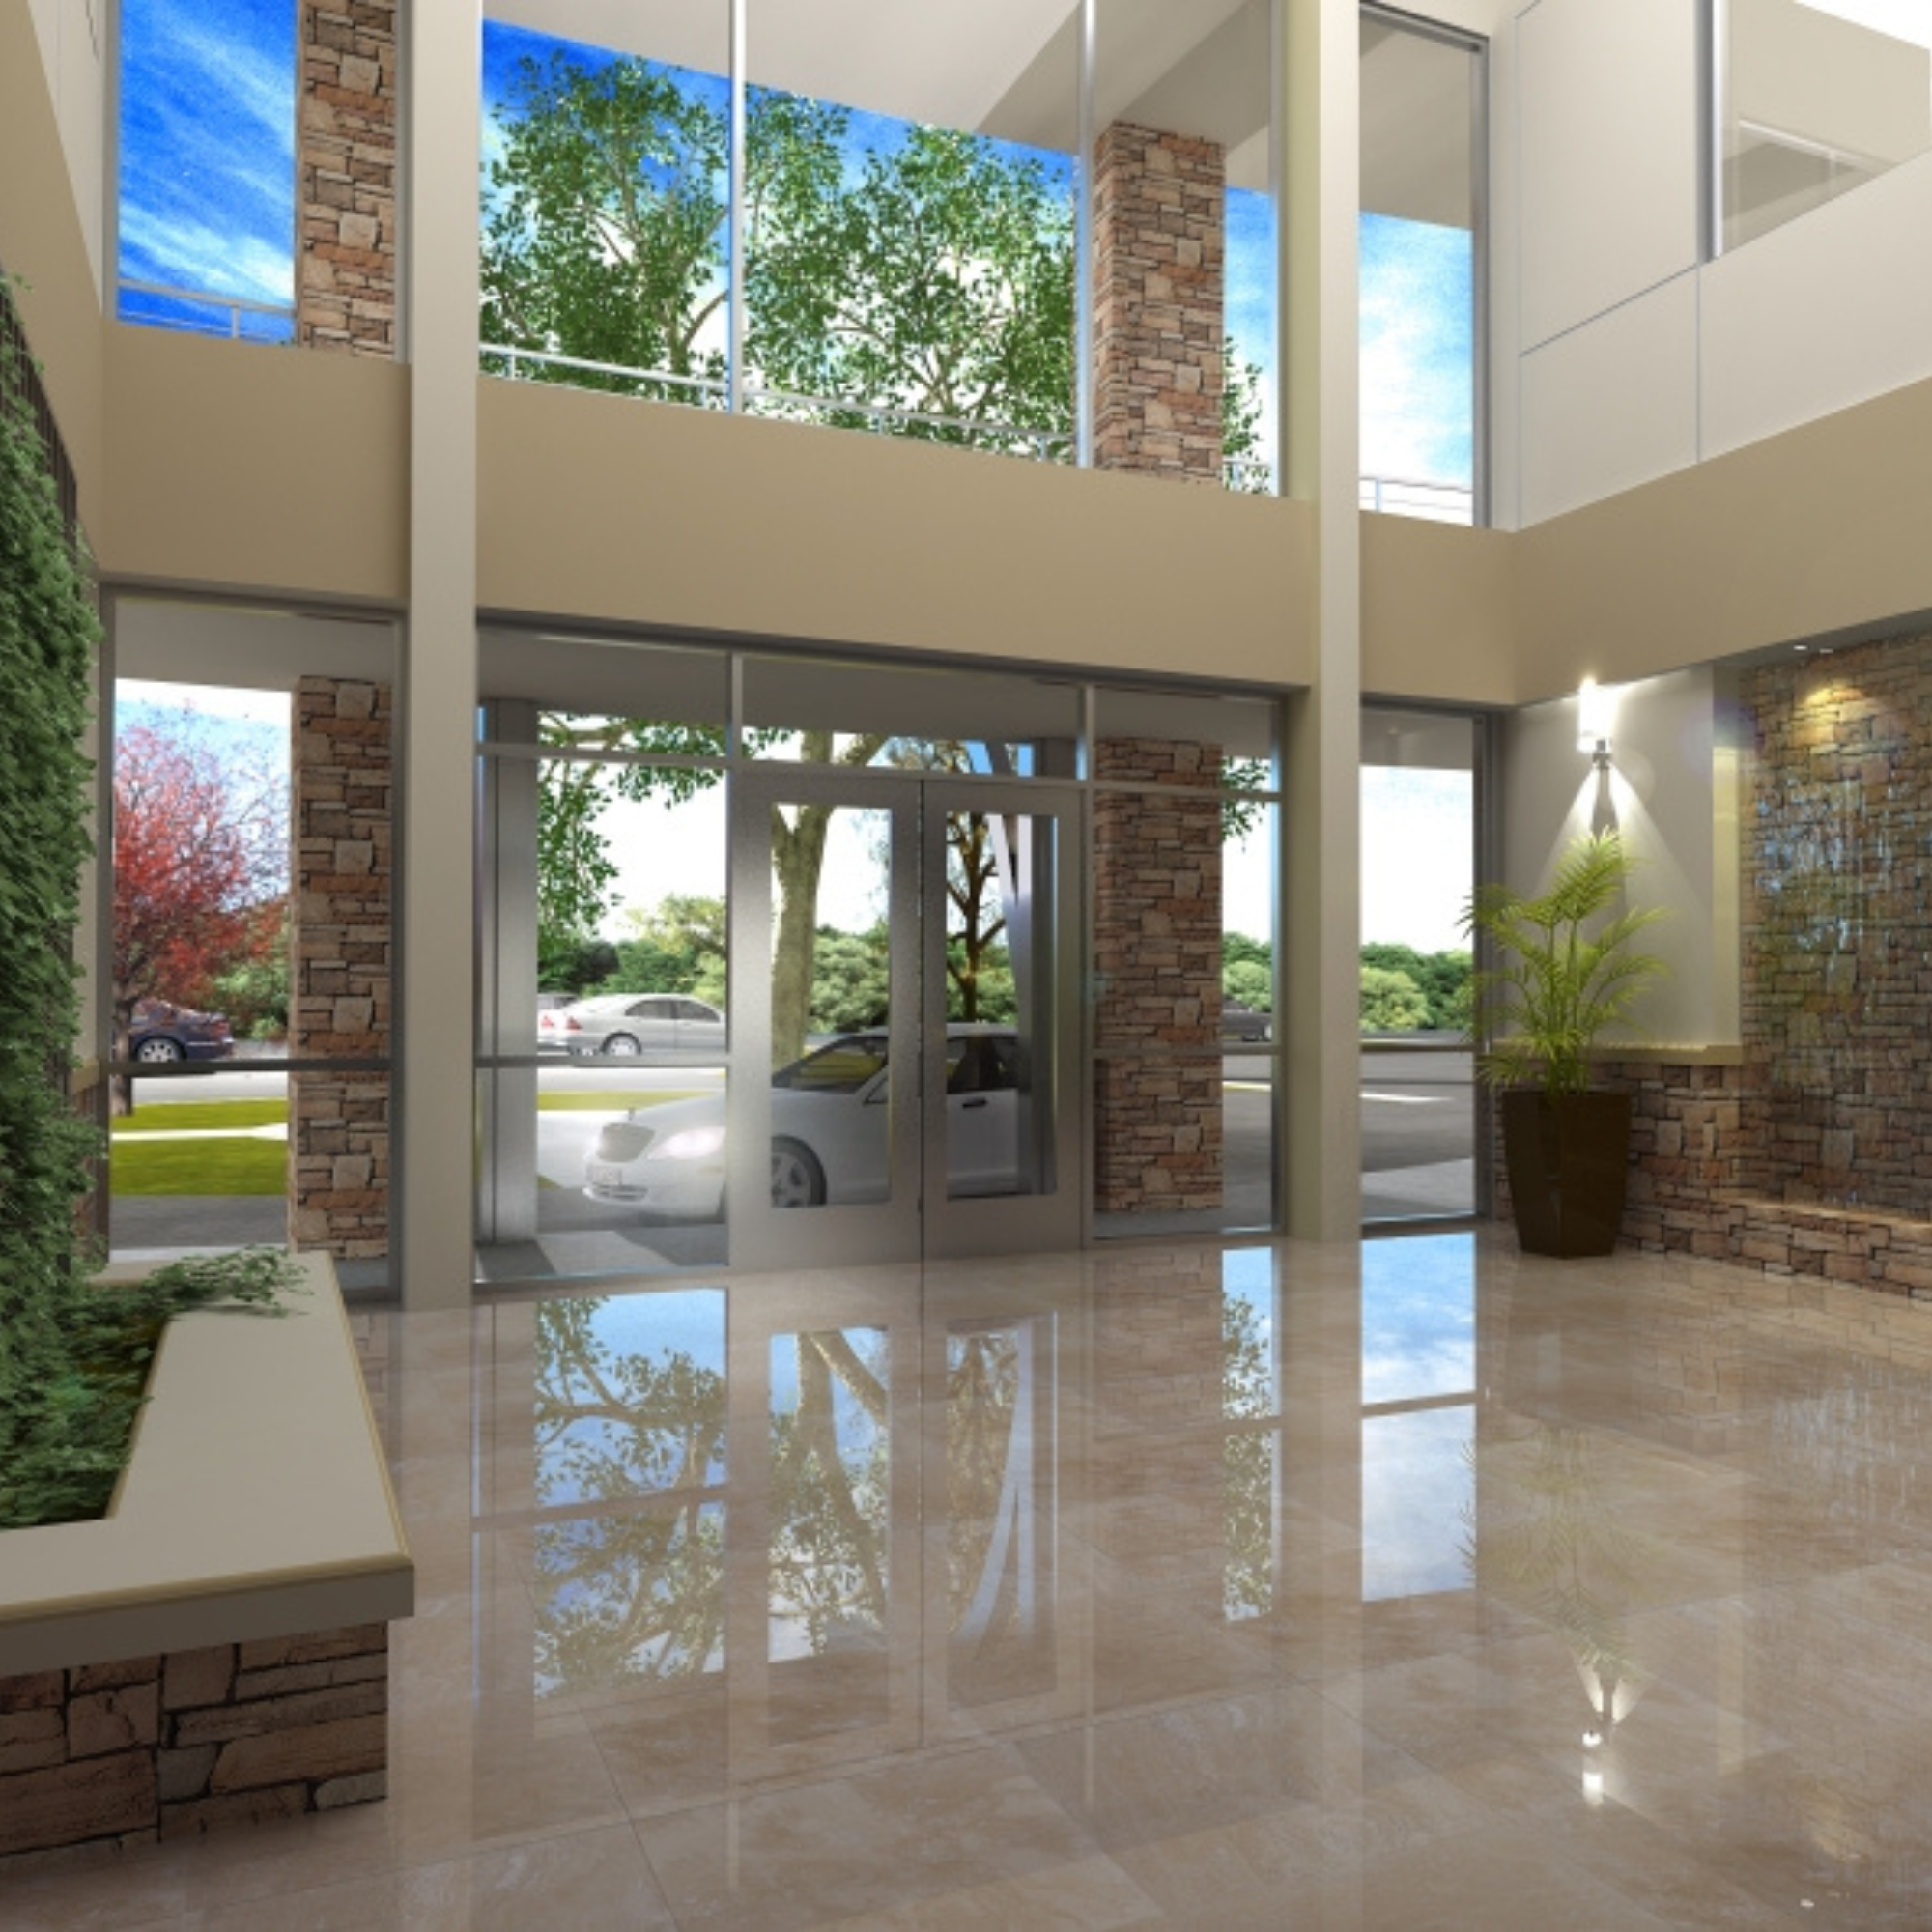 We create photorealistic renderings to communicate architectural projects